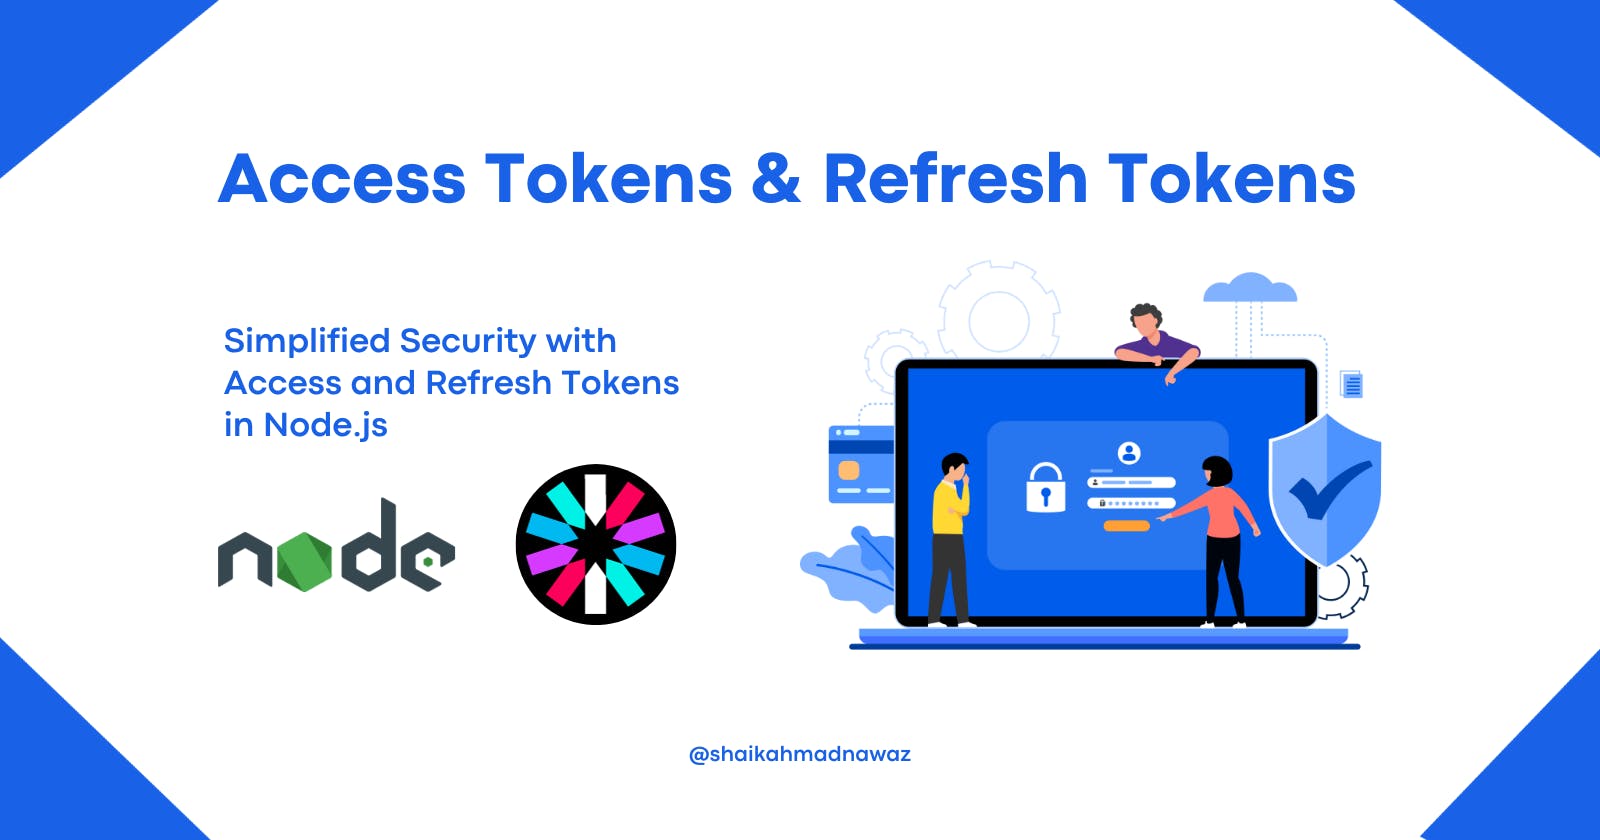 Simplified Security with Access and Refresh Tokens in Node.js